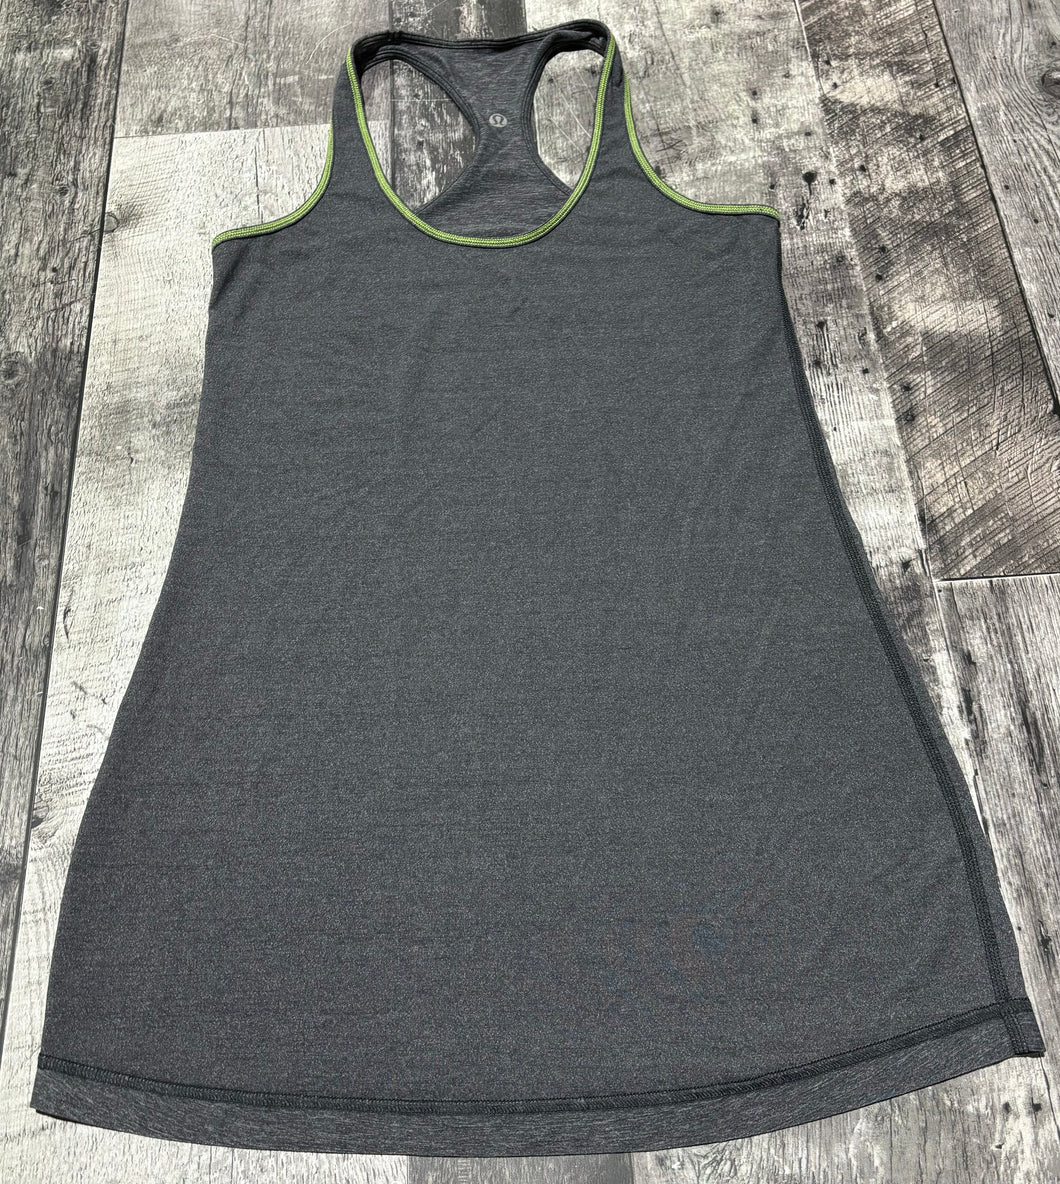 lululemon grey tank top - Hers size approx M